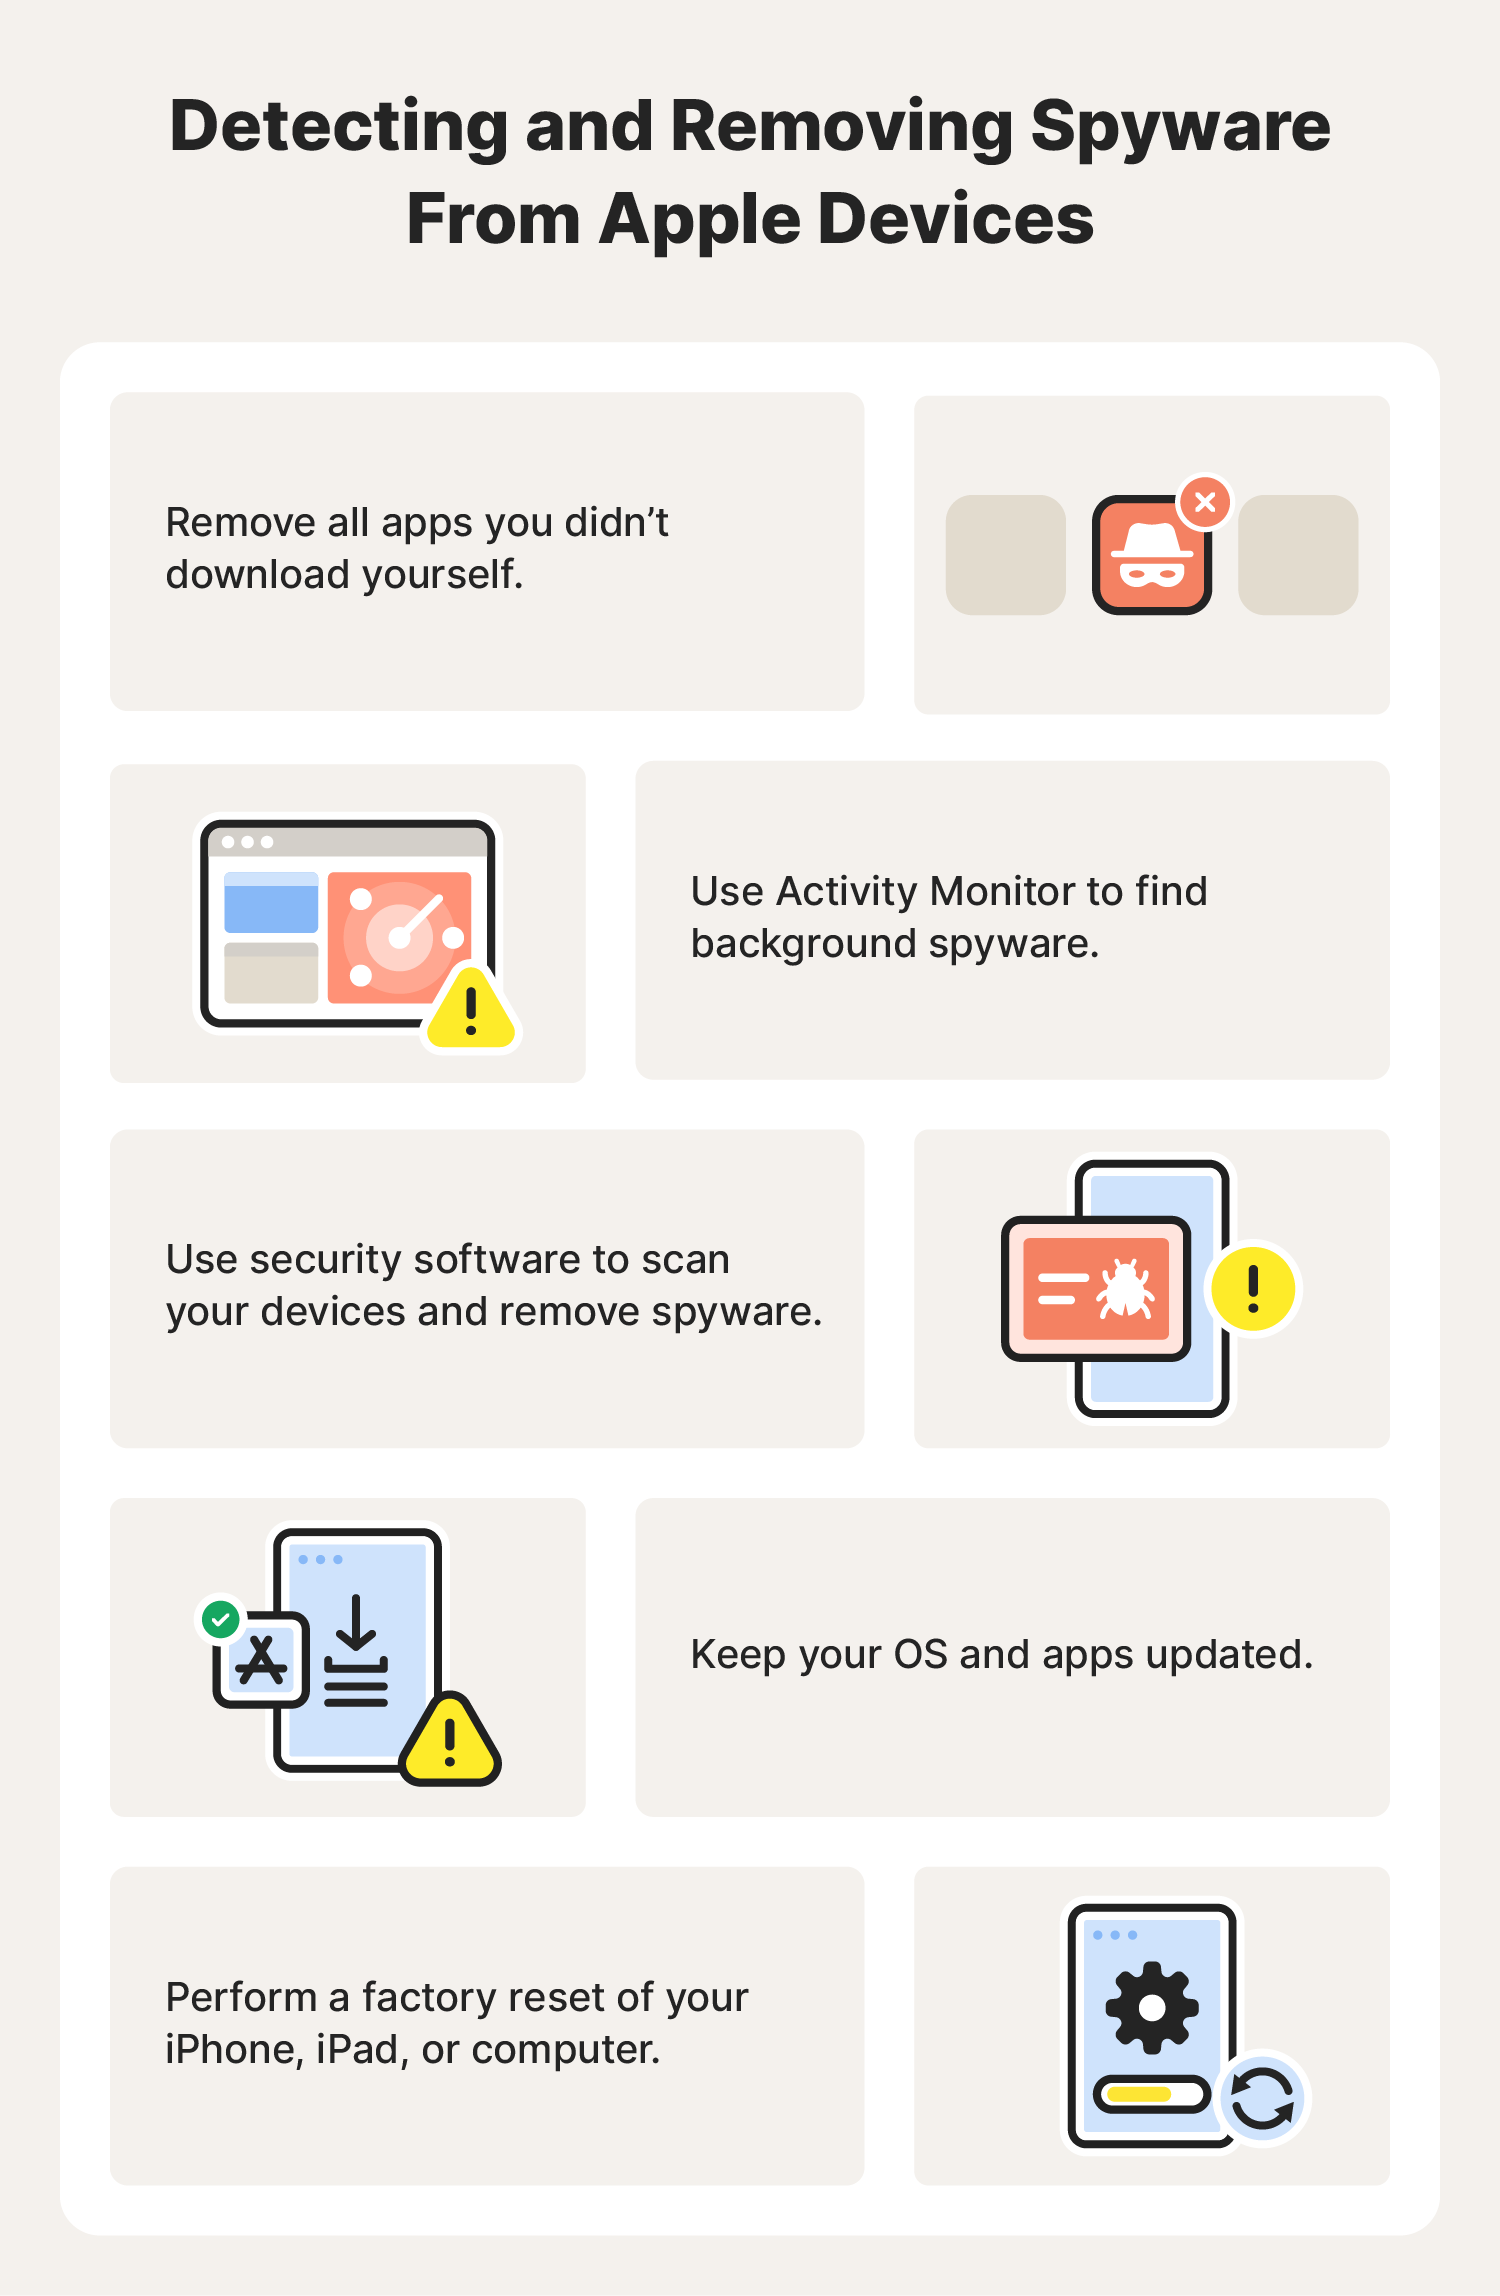 Illustrated chart with tips for detecting and removing spyware from Apple devices.